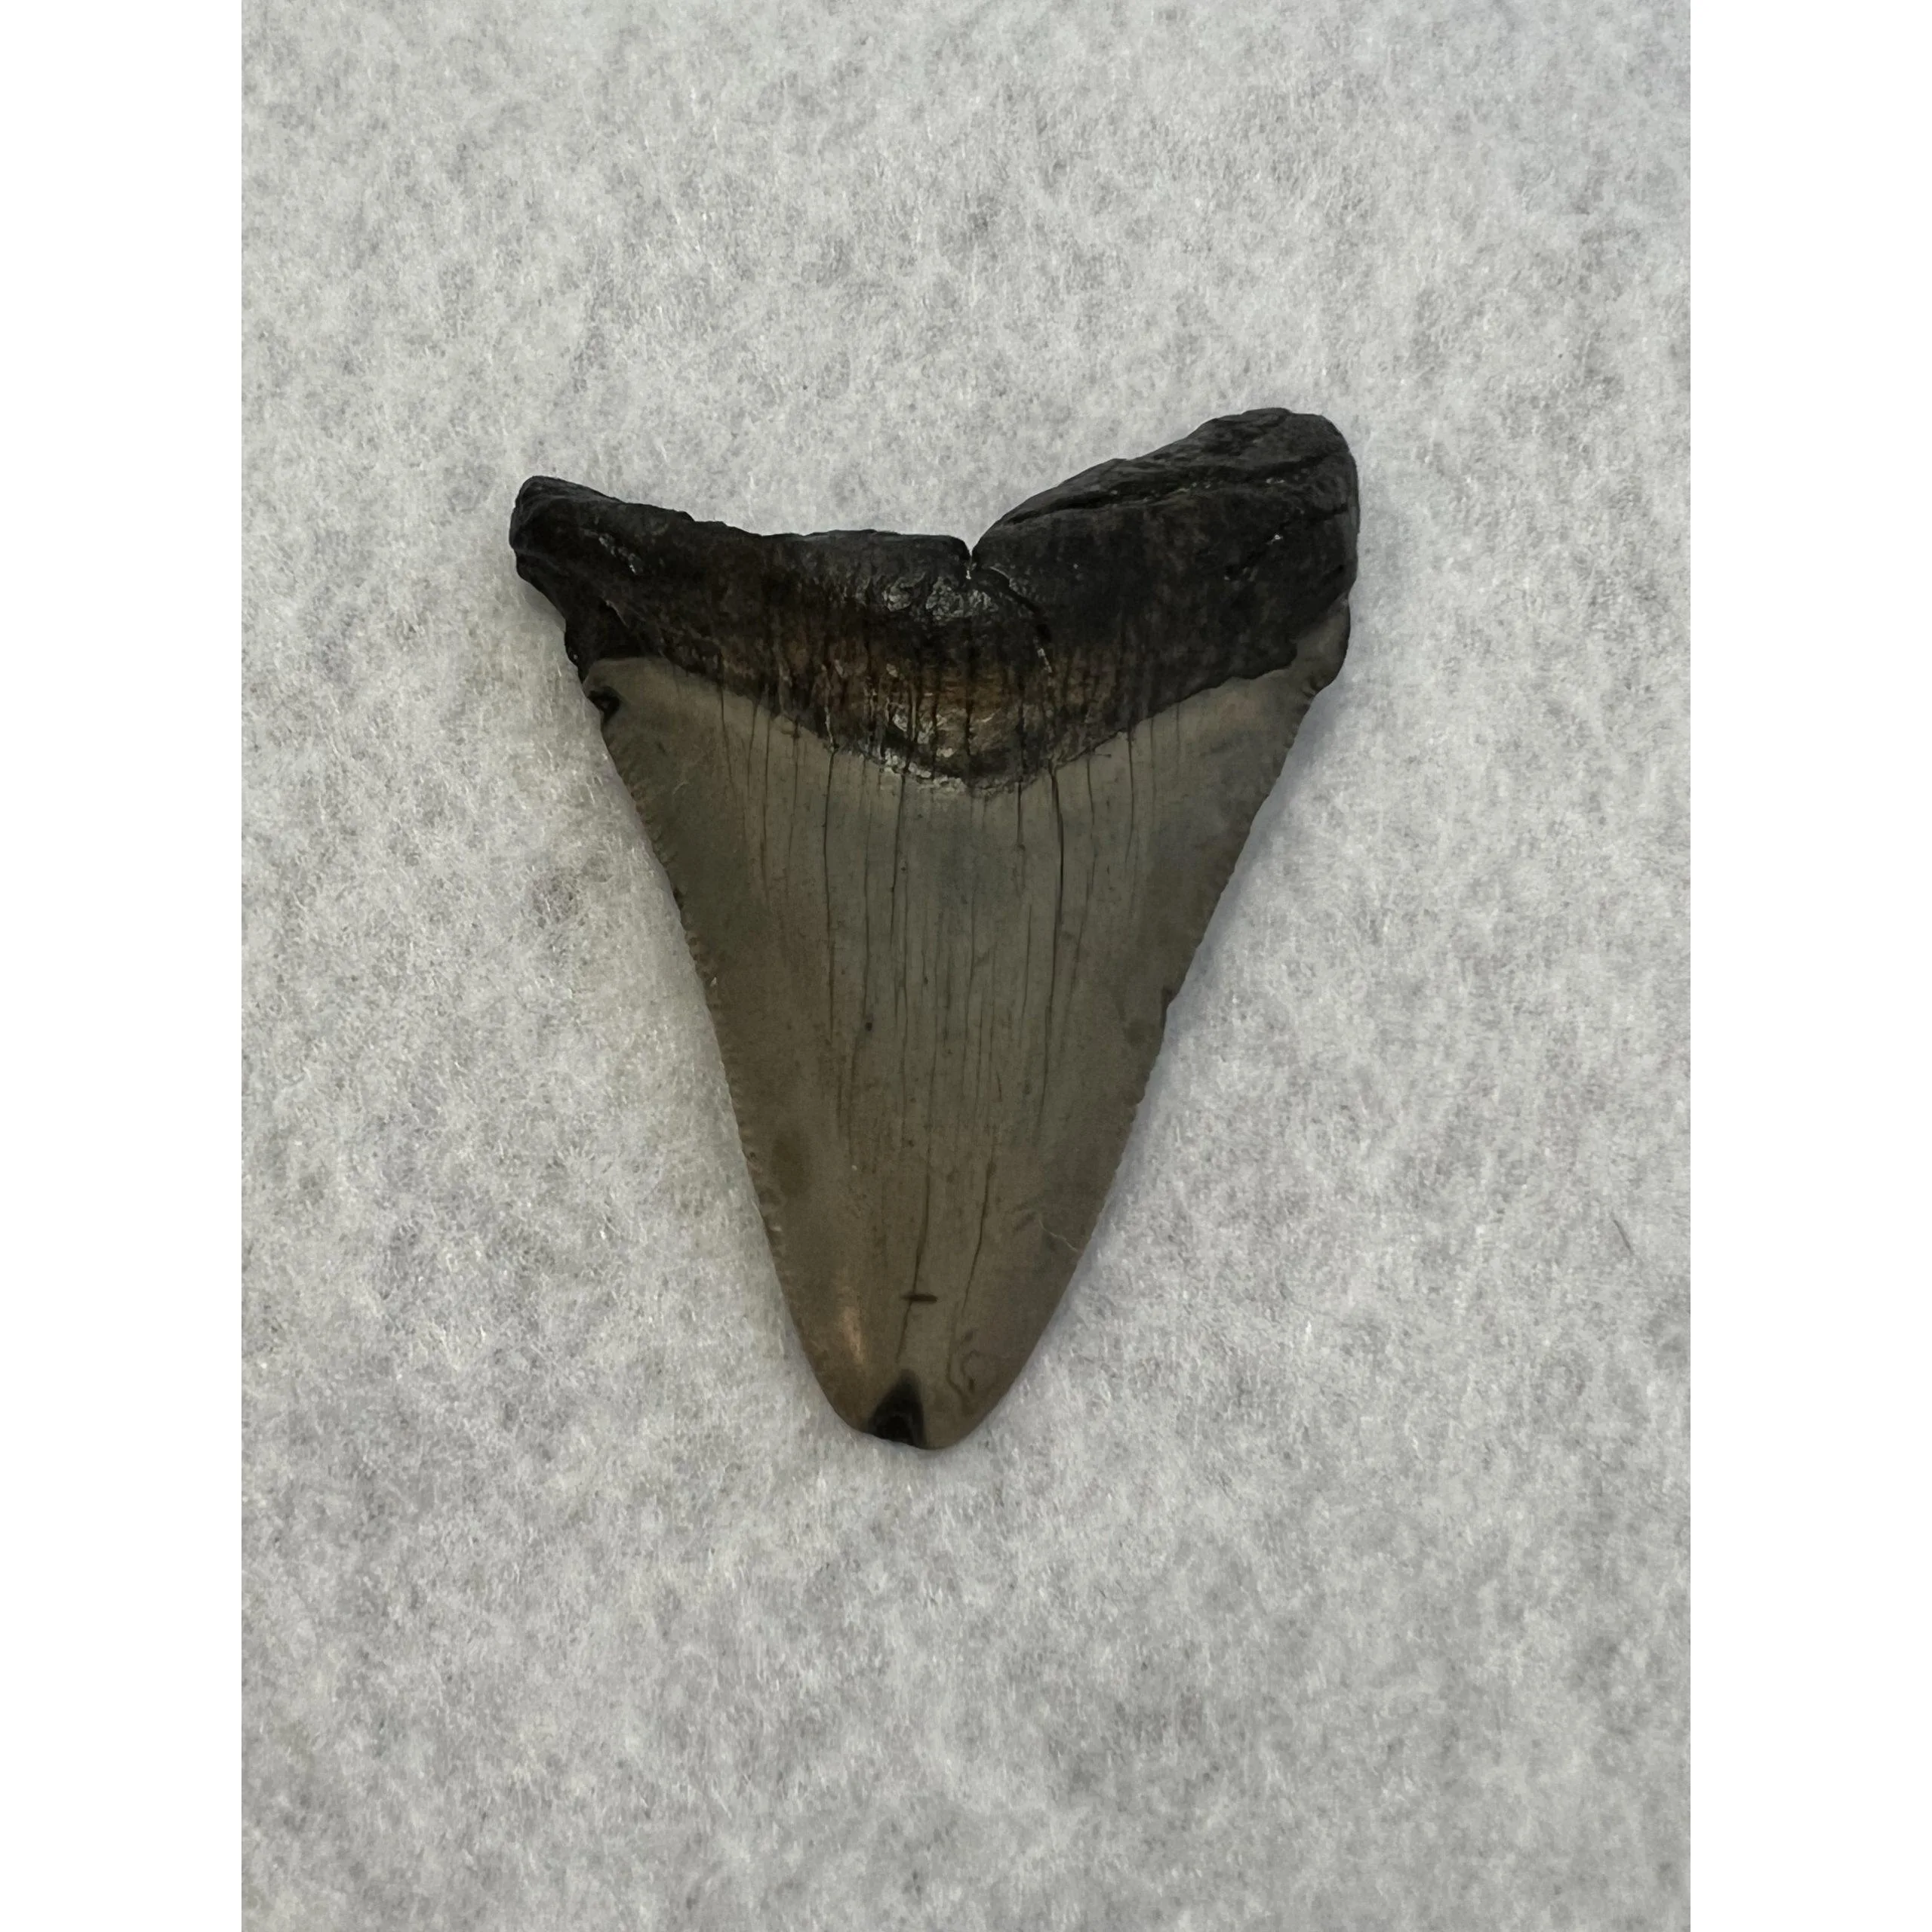 Megalodon Tooth South Carolina 2.60 inch Prehistoric Online